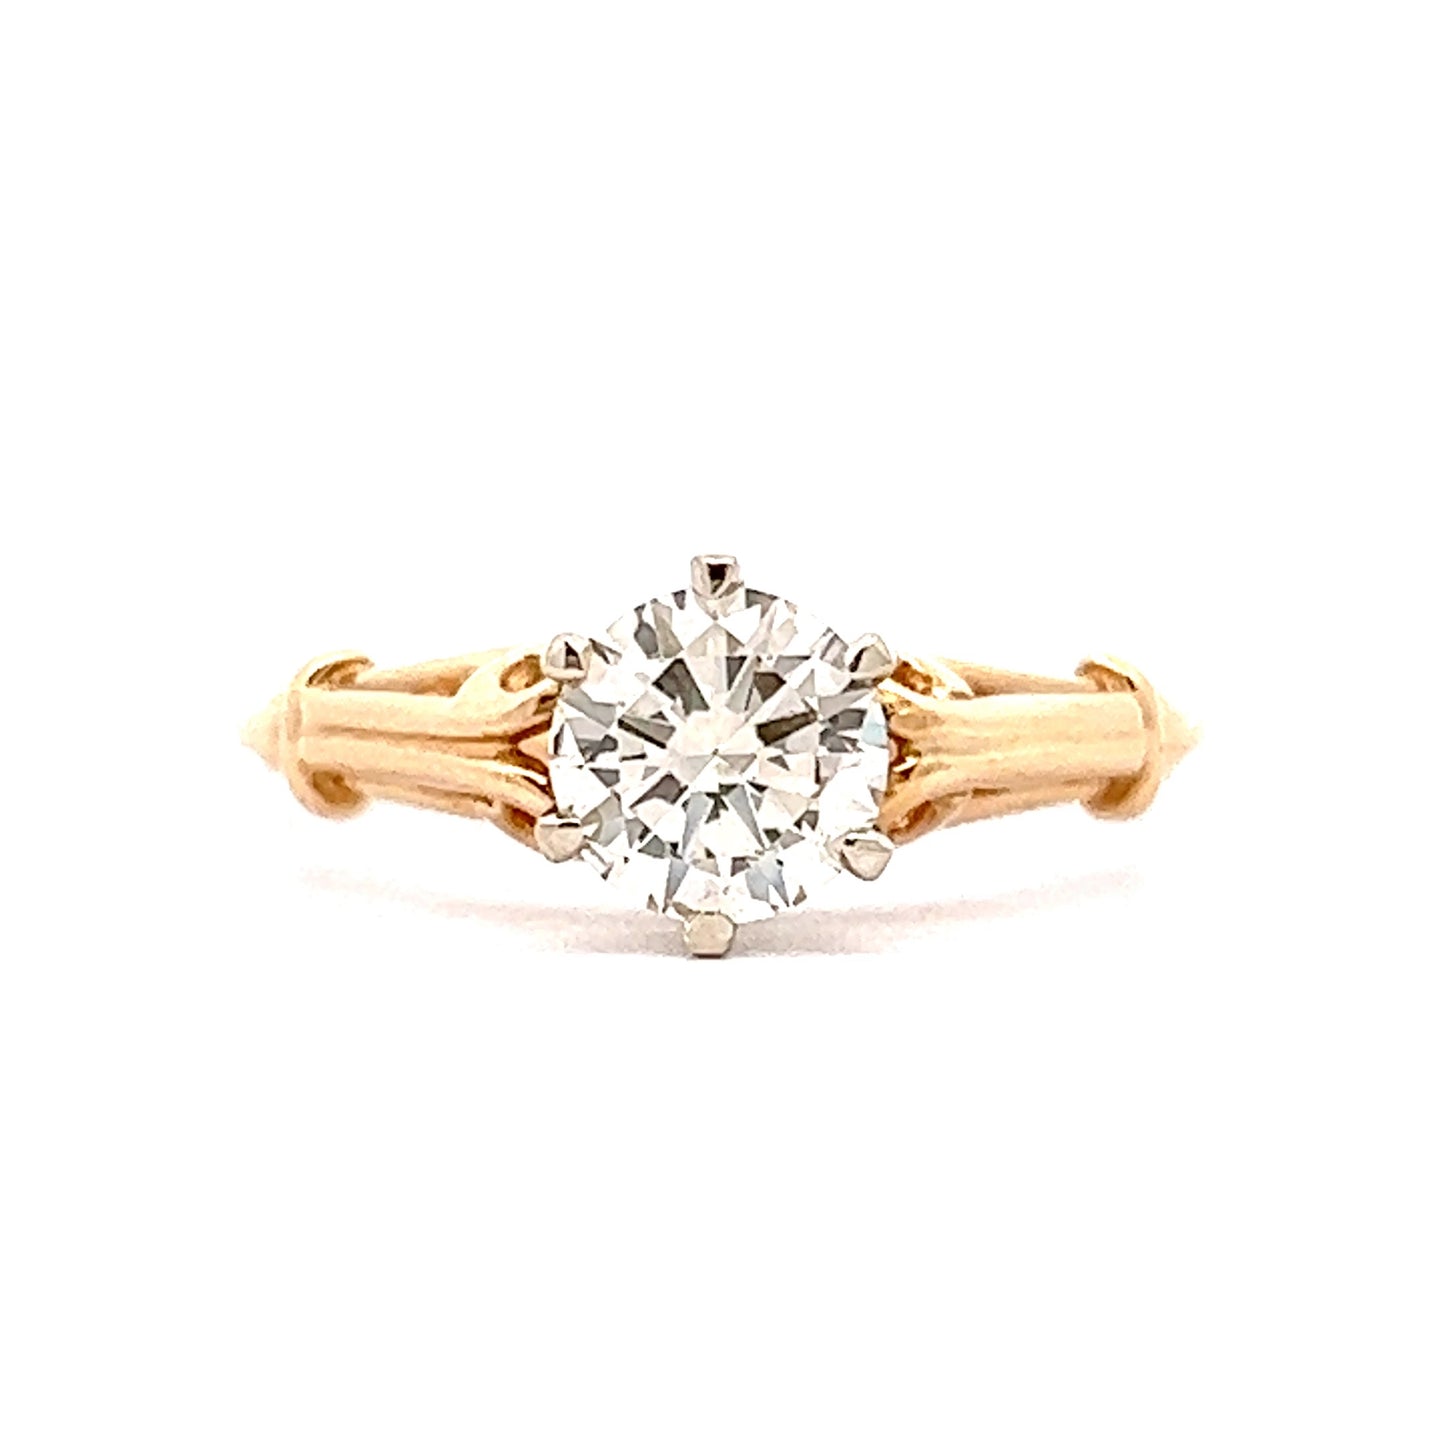 .92 Solitaire Diamond Engagement Ring in 14K Yellow Gold